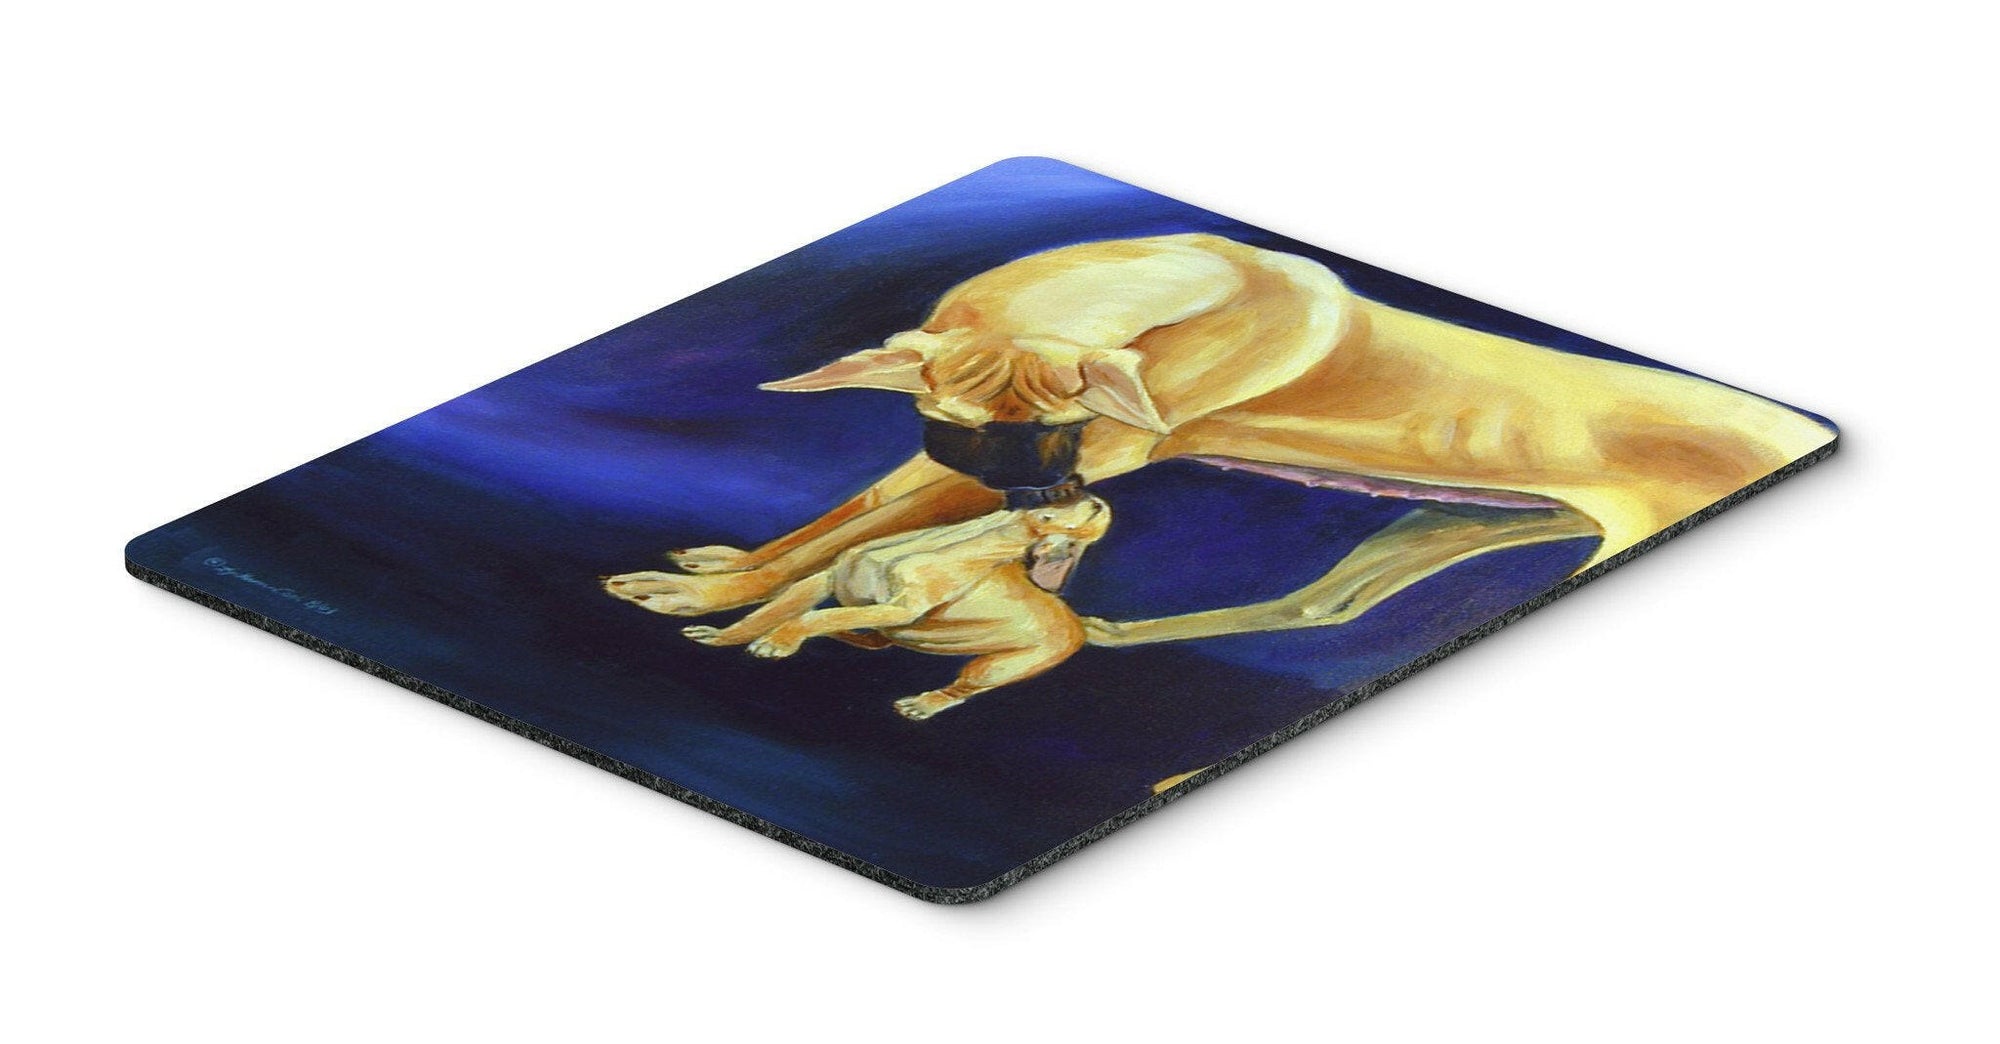 Natural Fawn Great Dane with Puppy Mouse Pad / Hot Pad / Trivet by Caroline's Treasures